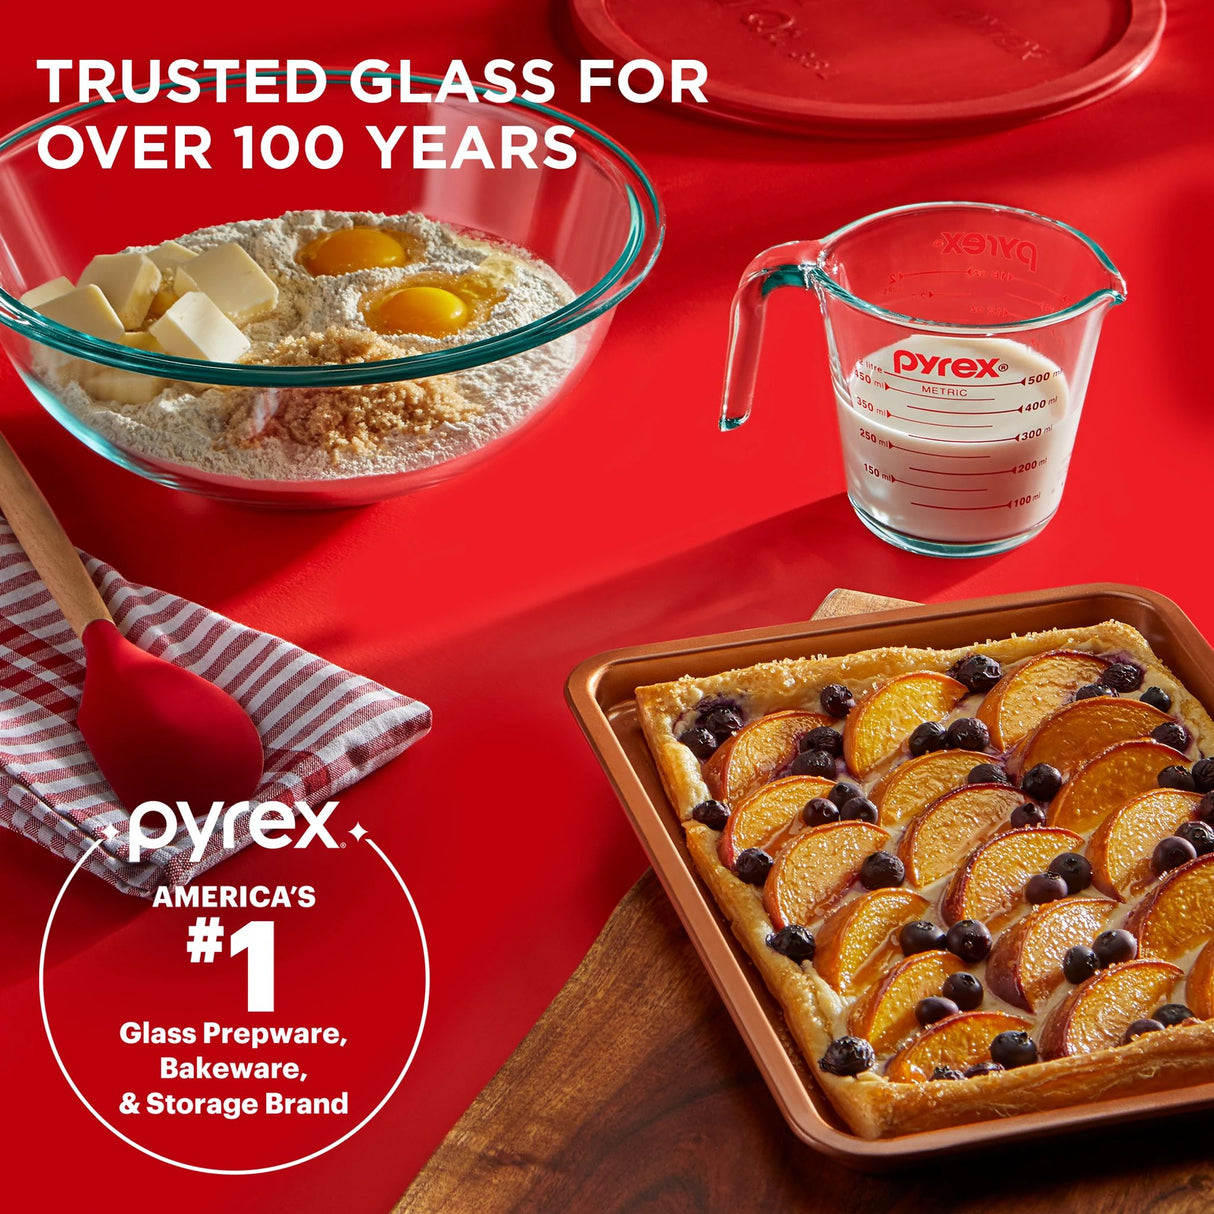  Smart Essentials 3-piece Glass Prep Set on table with food &amp; text trusted glass for over 100 years